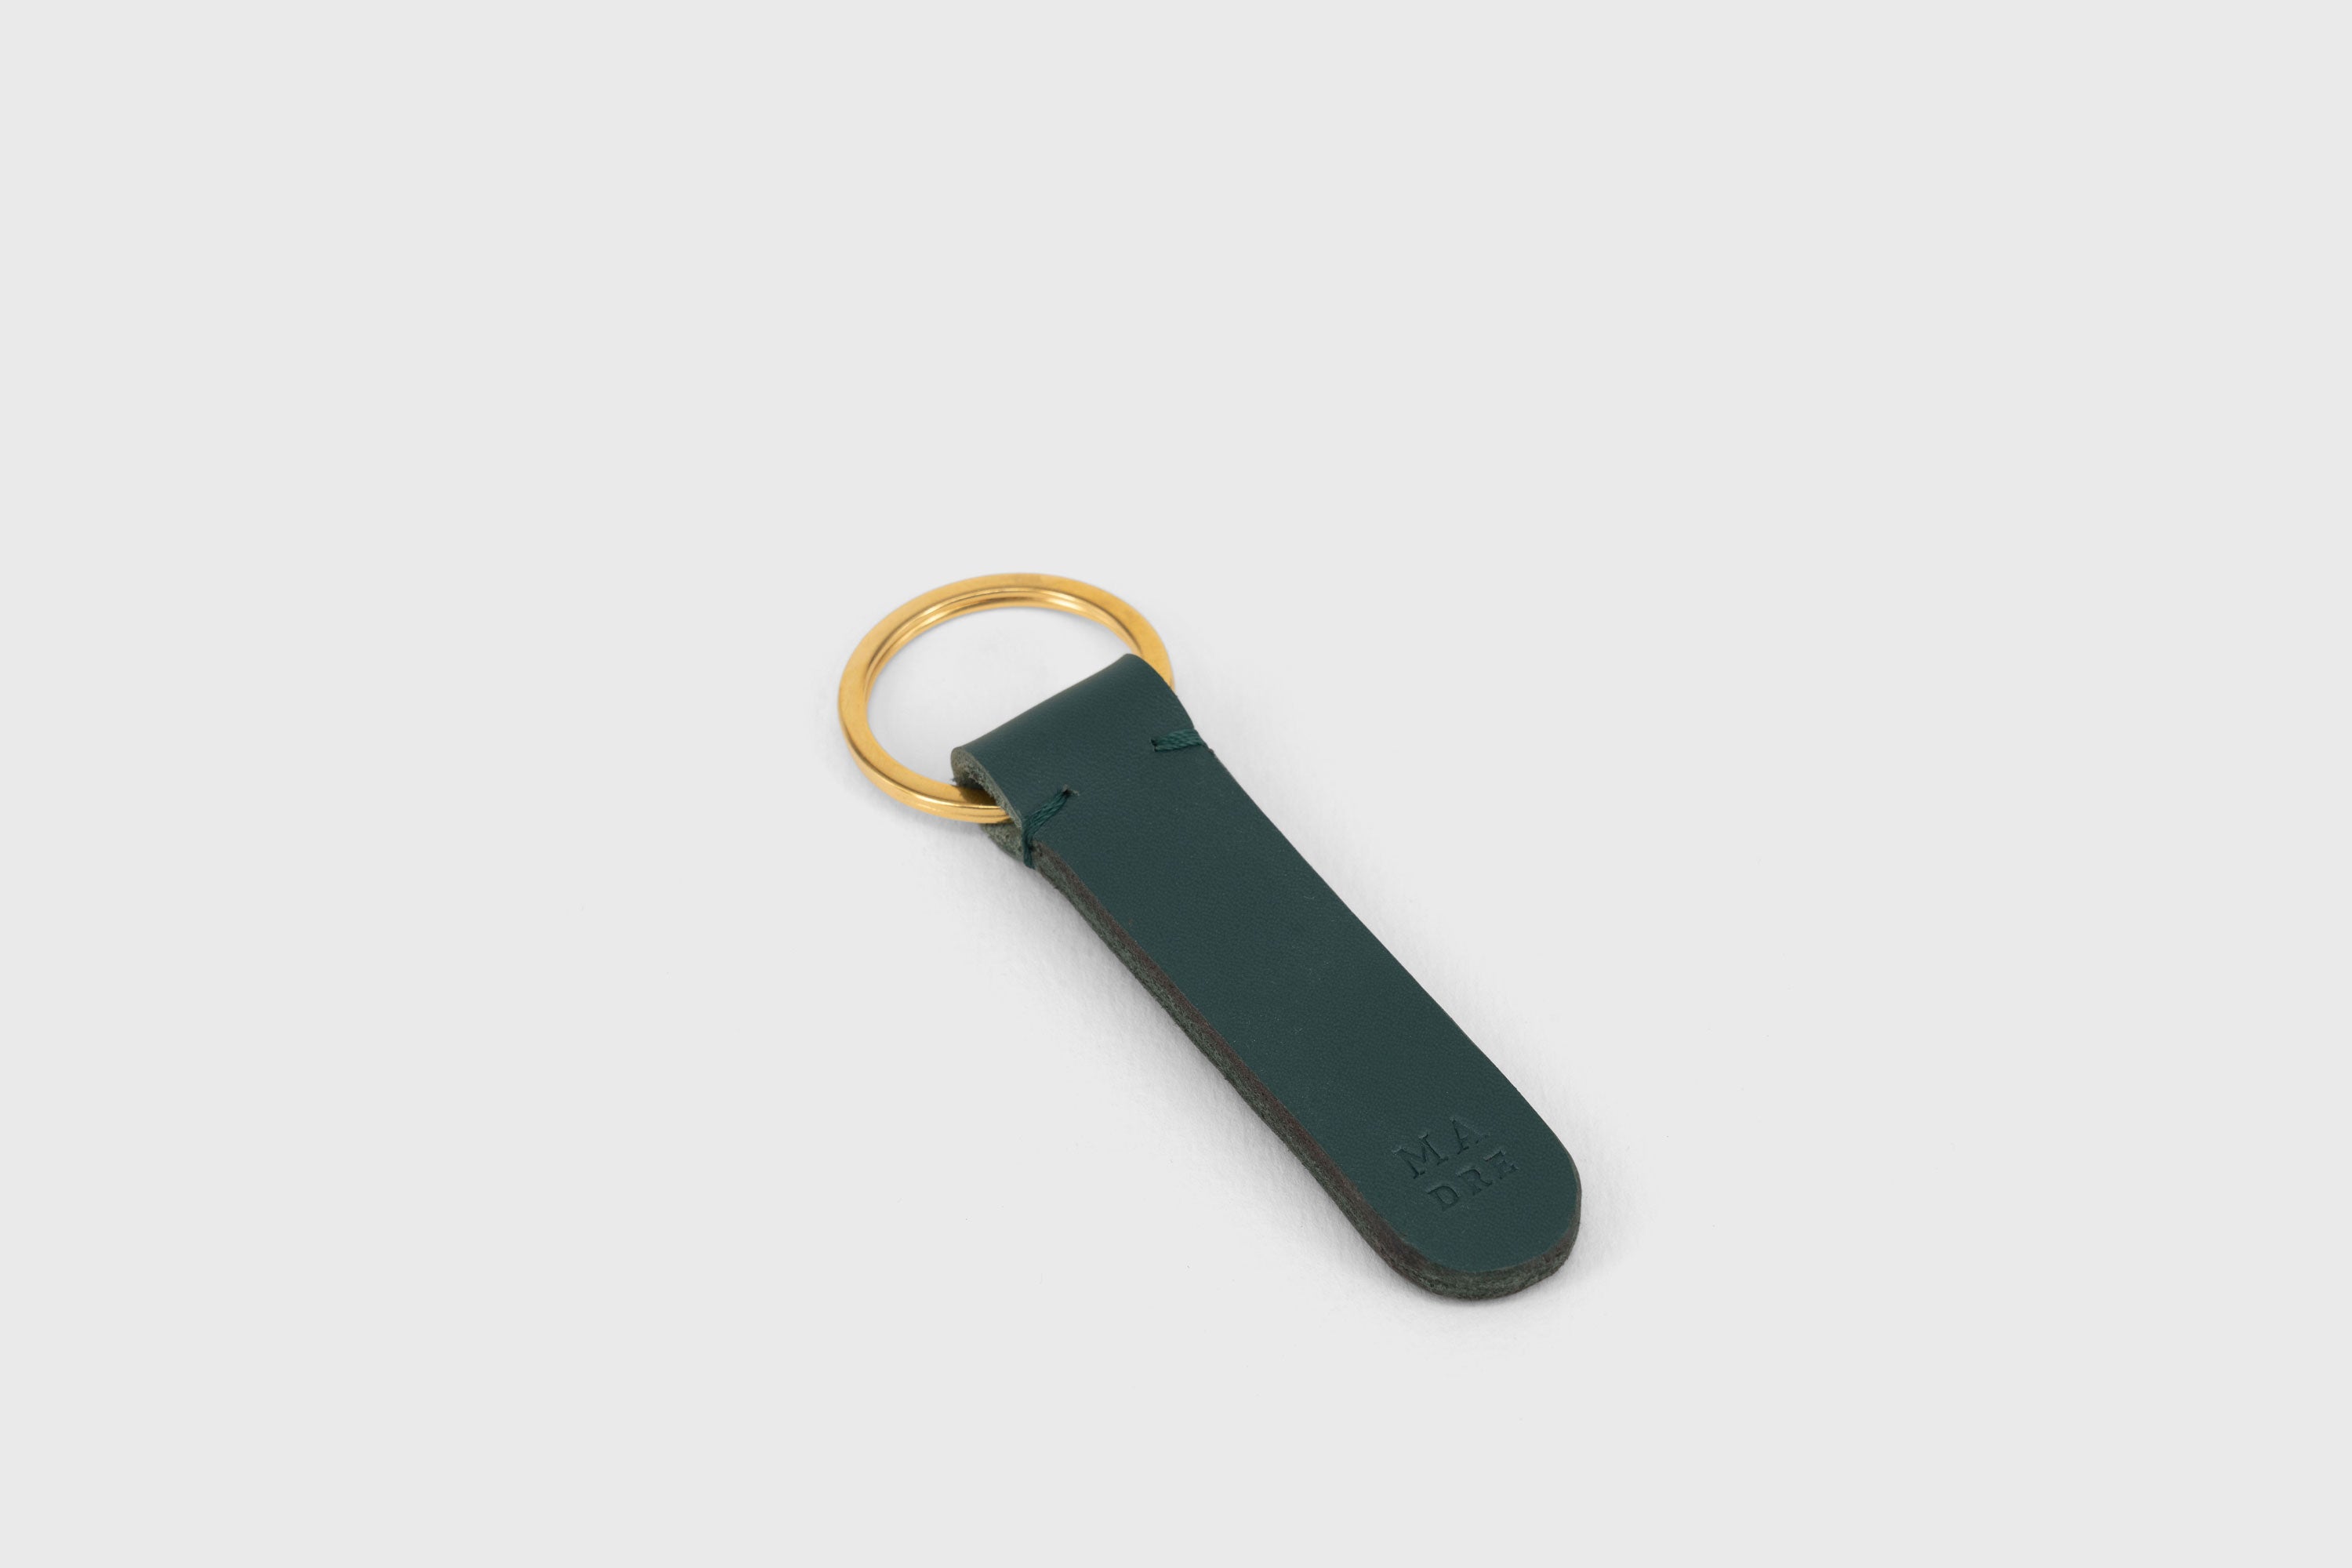 Key Ring Leather Teal Color Fob Minimalist Designer Vegetable Tanned Full Grain Handcrafted Personalised Premium Quality Gold Atelier Madre Manuel Dreesmann Barcelona Spain